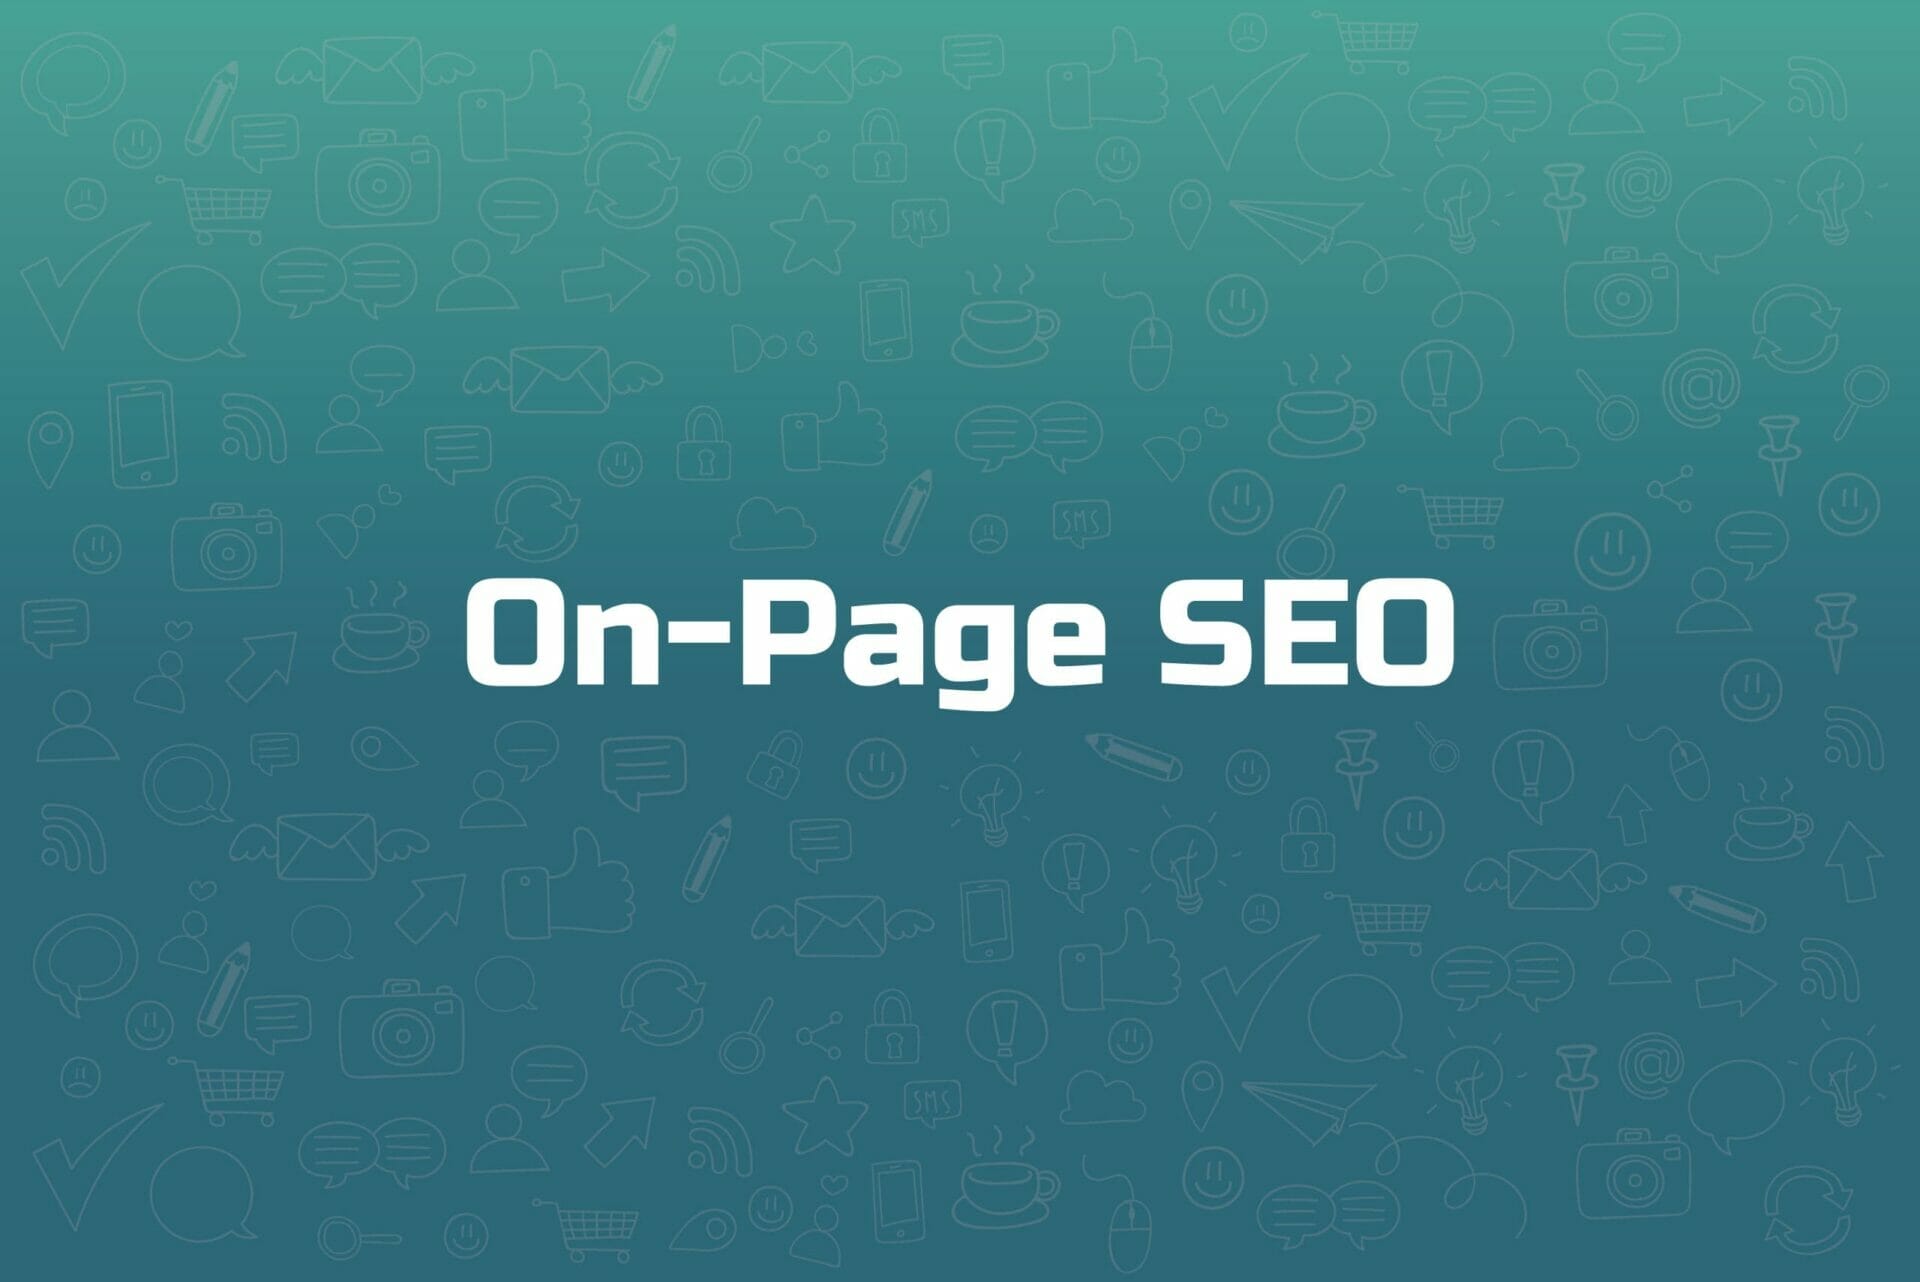 Concepts of Advanced On-Page SEO